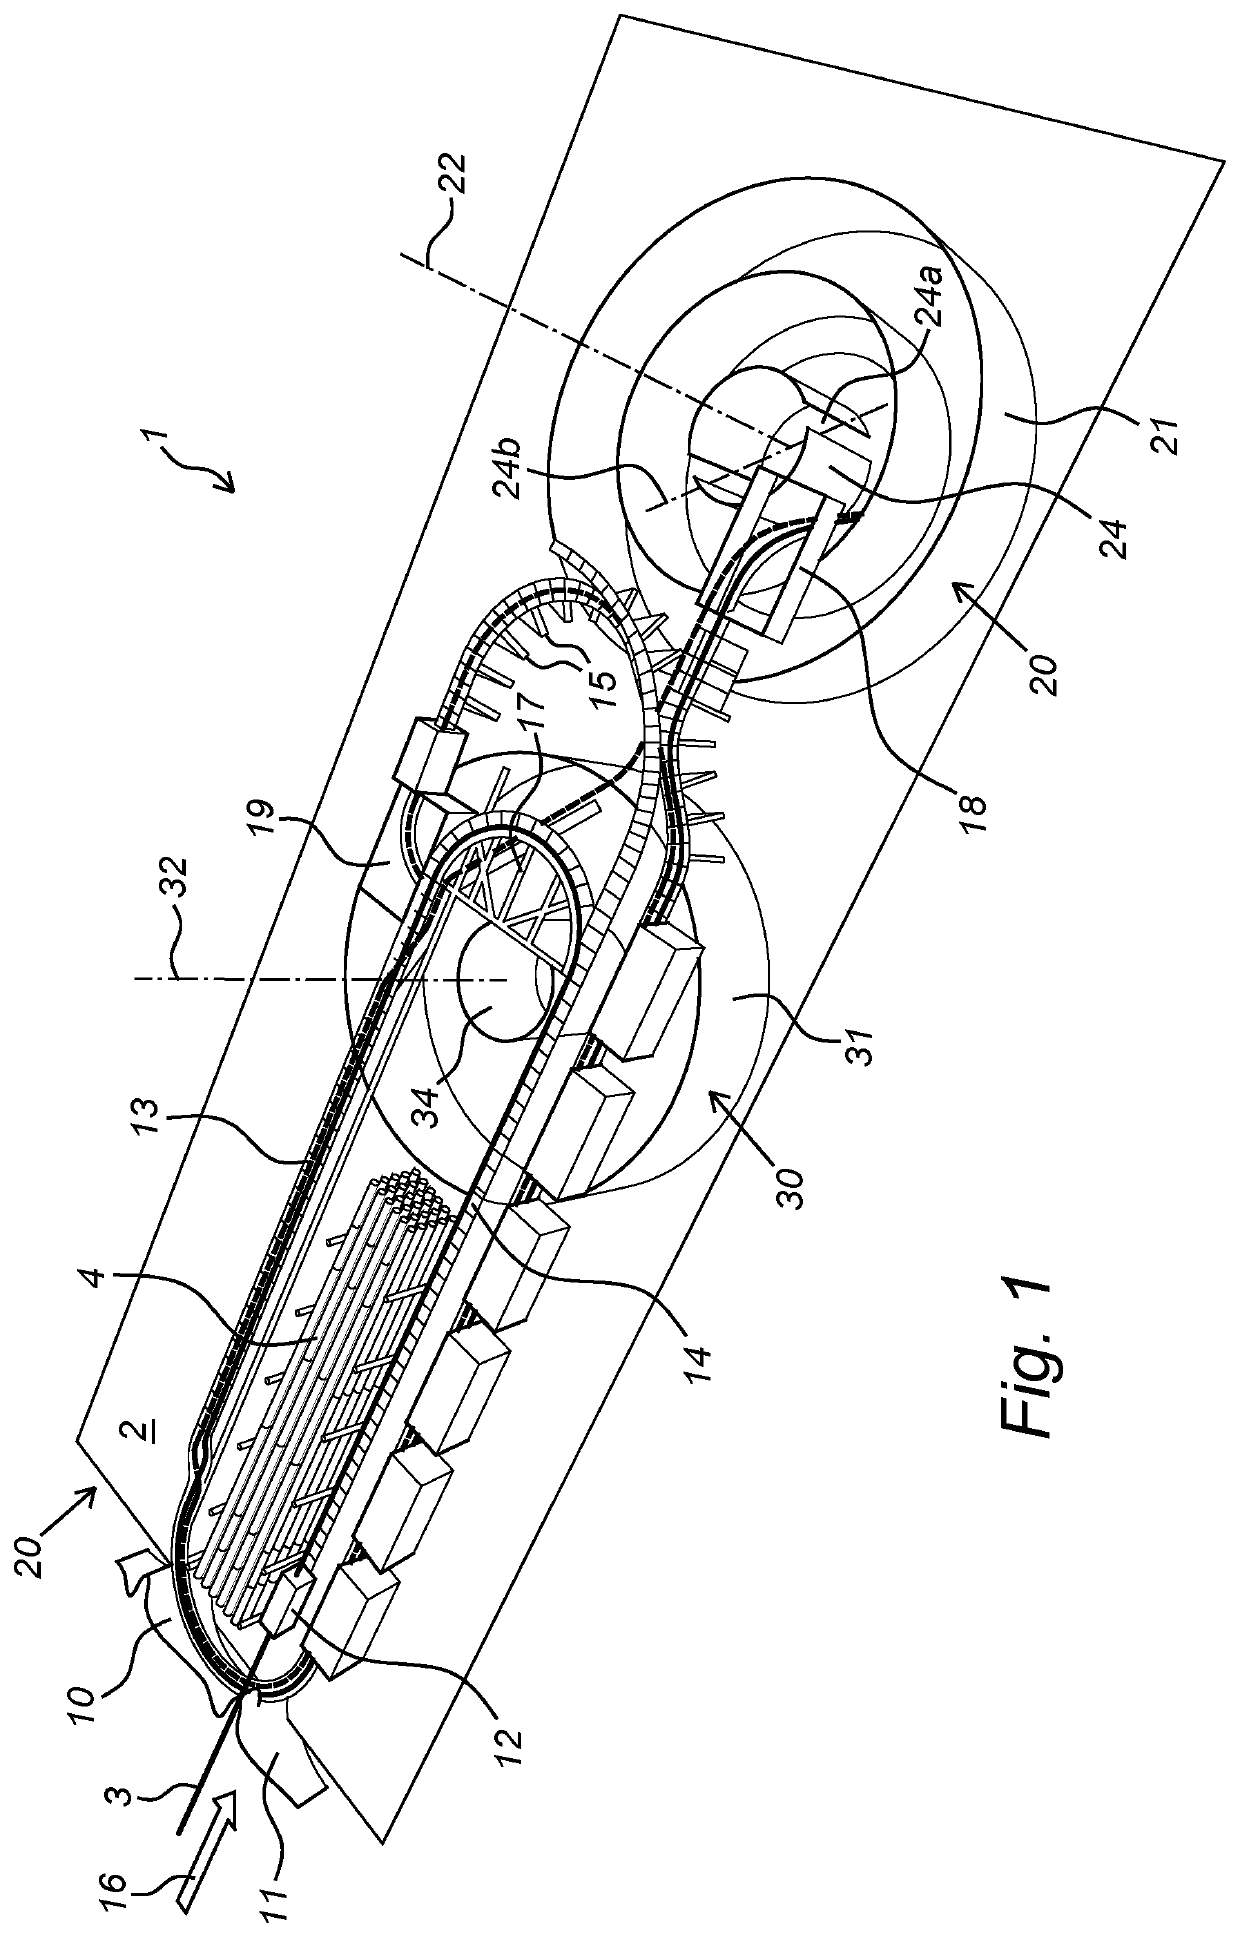 Device and Method for Reeling in a Cable from a Source and Temporarily Storing the Cable